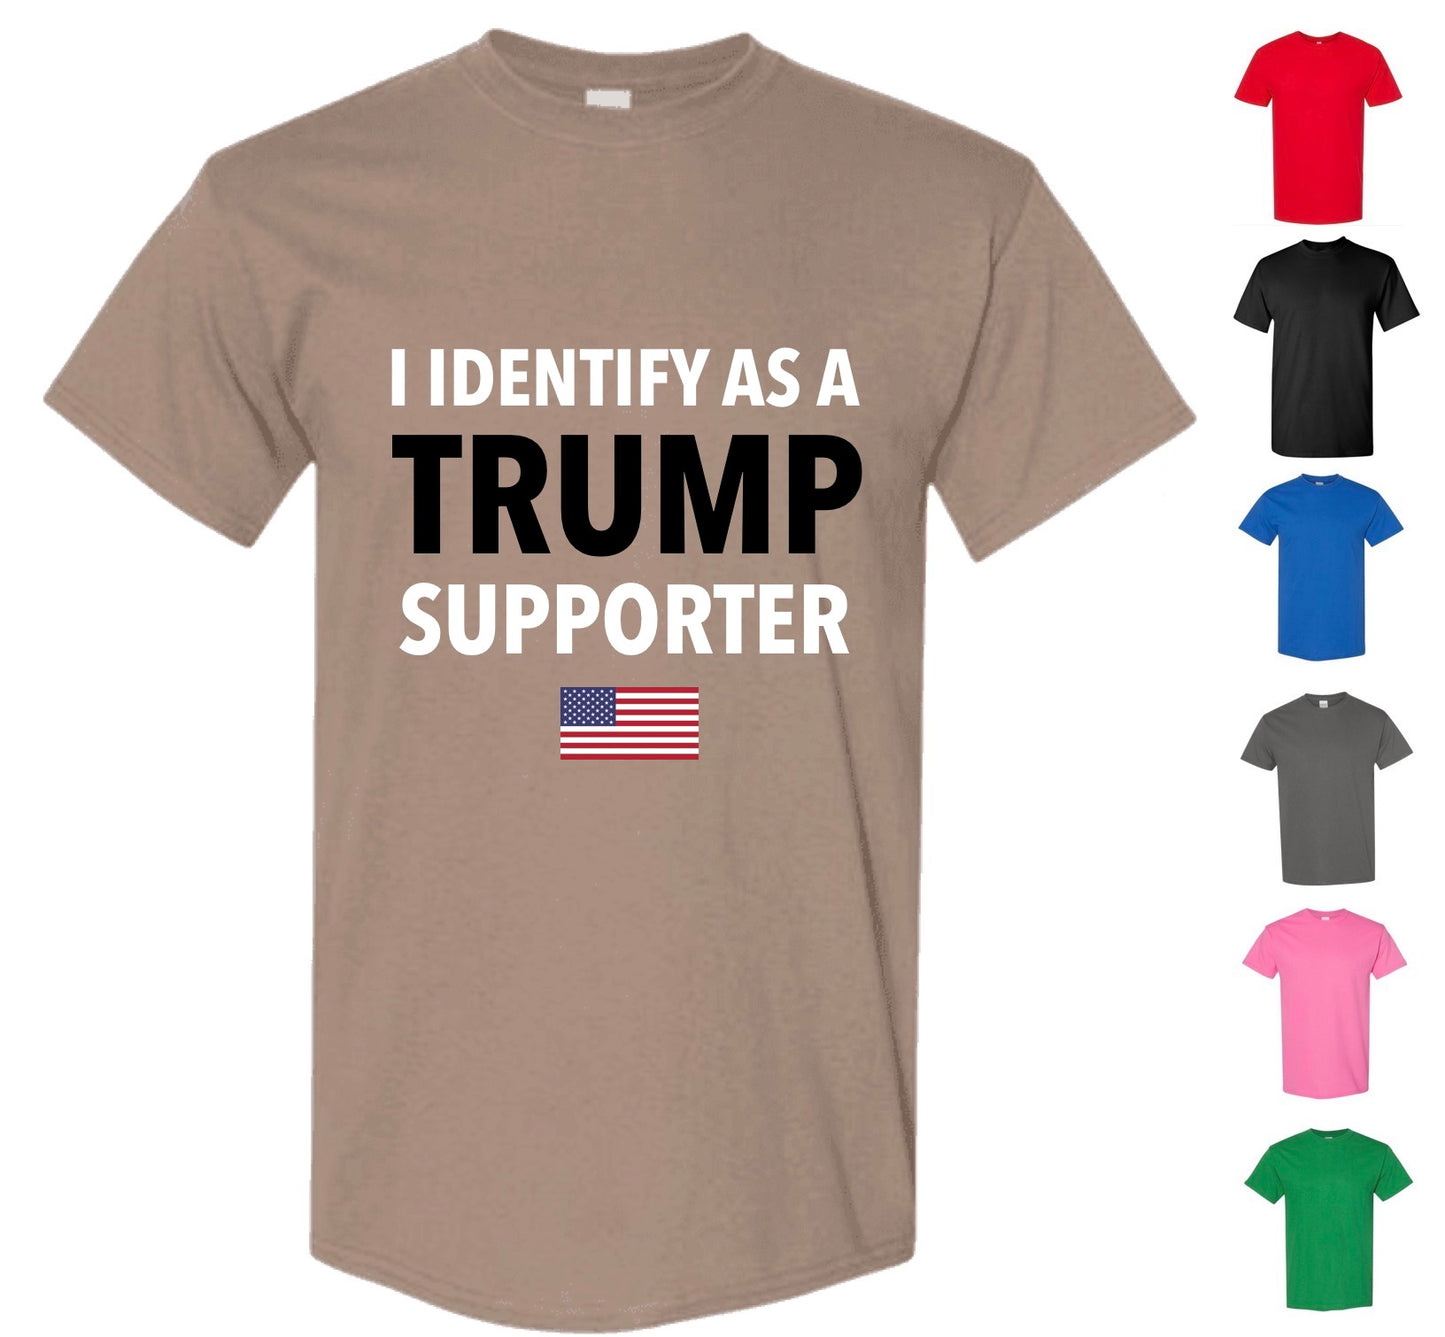 I Identify As A Trump Supporter — Free Shipping!